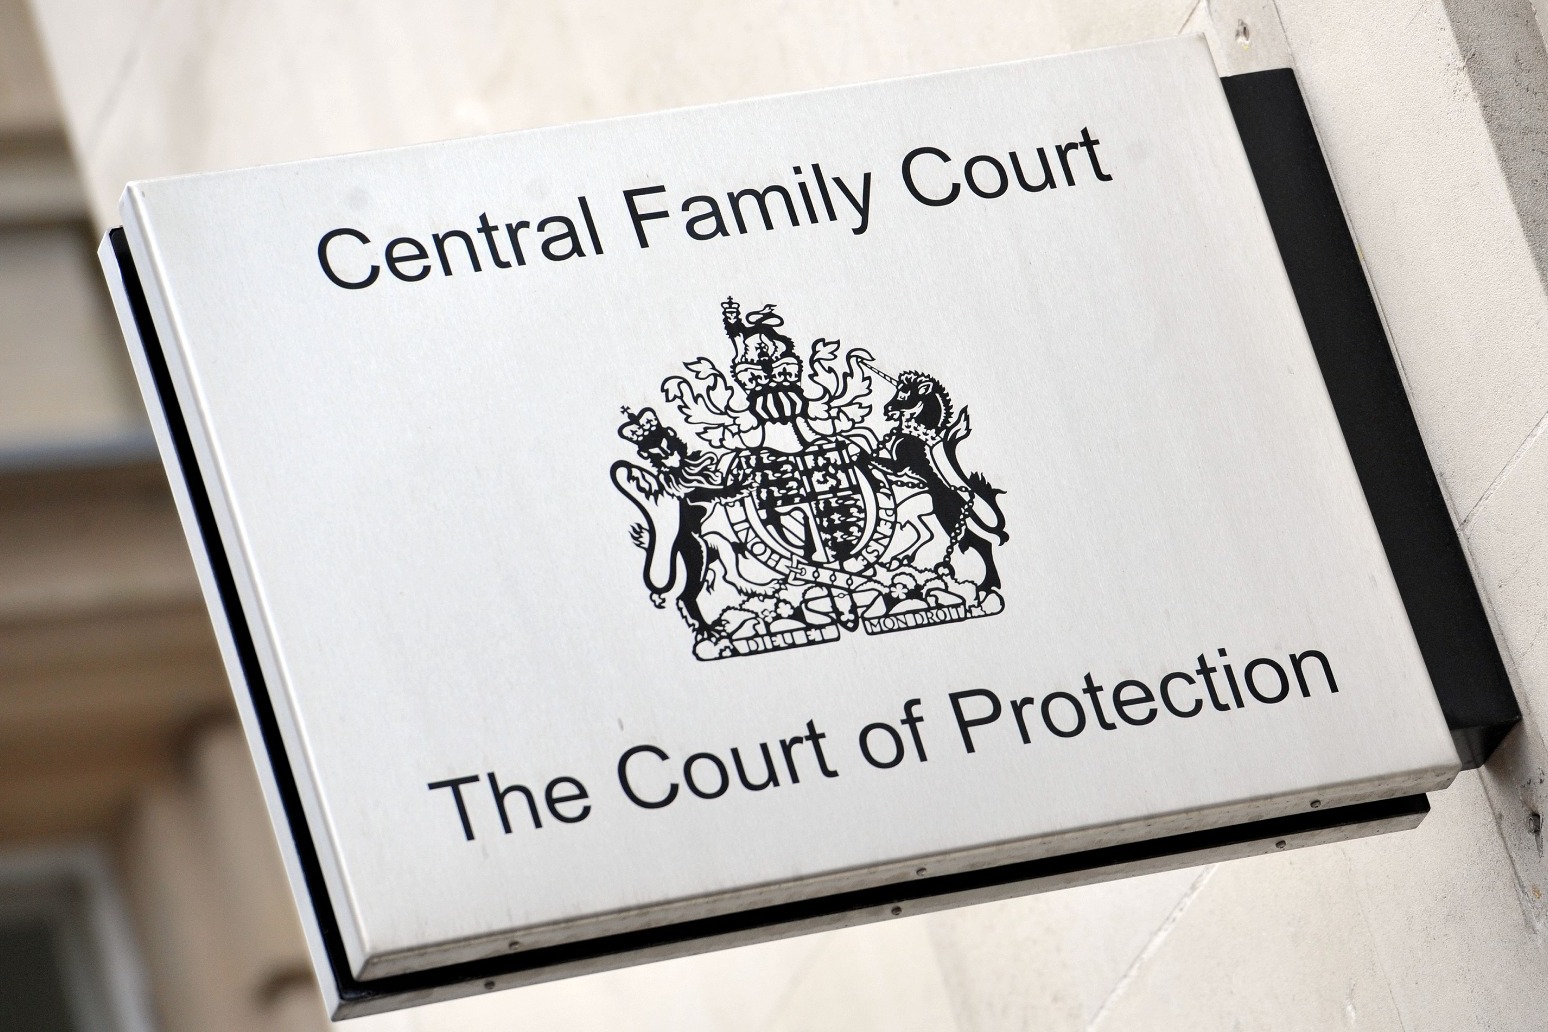 Pilot scheme to open up proceedings in family courts expanded 